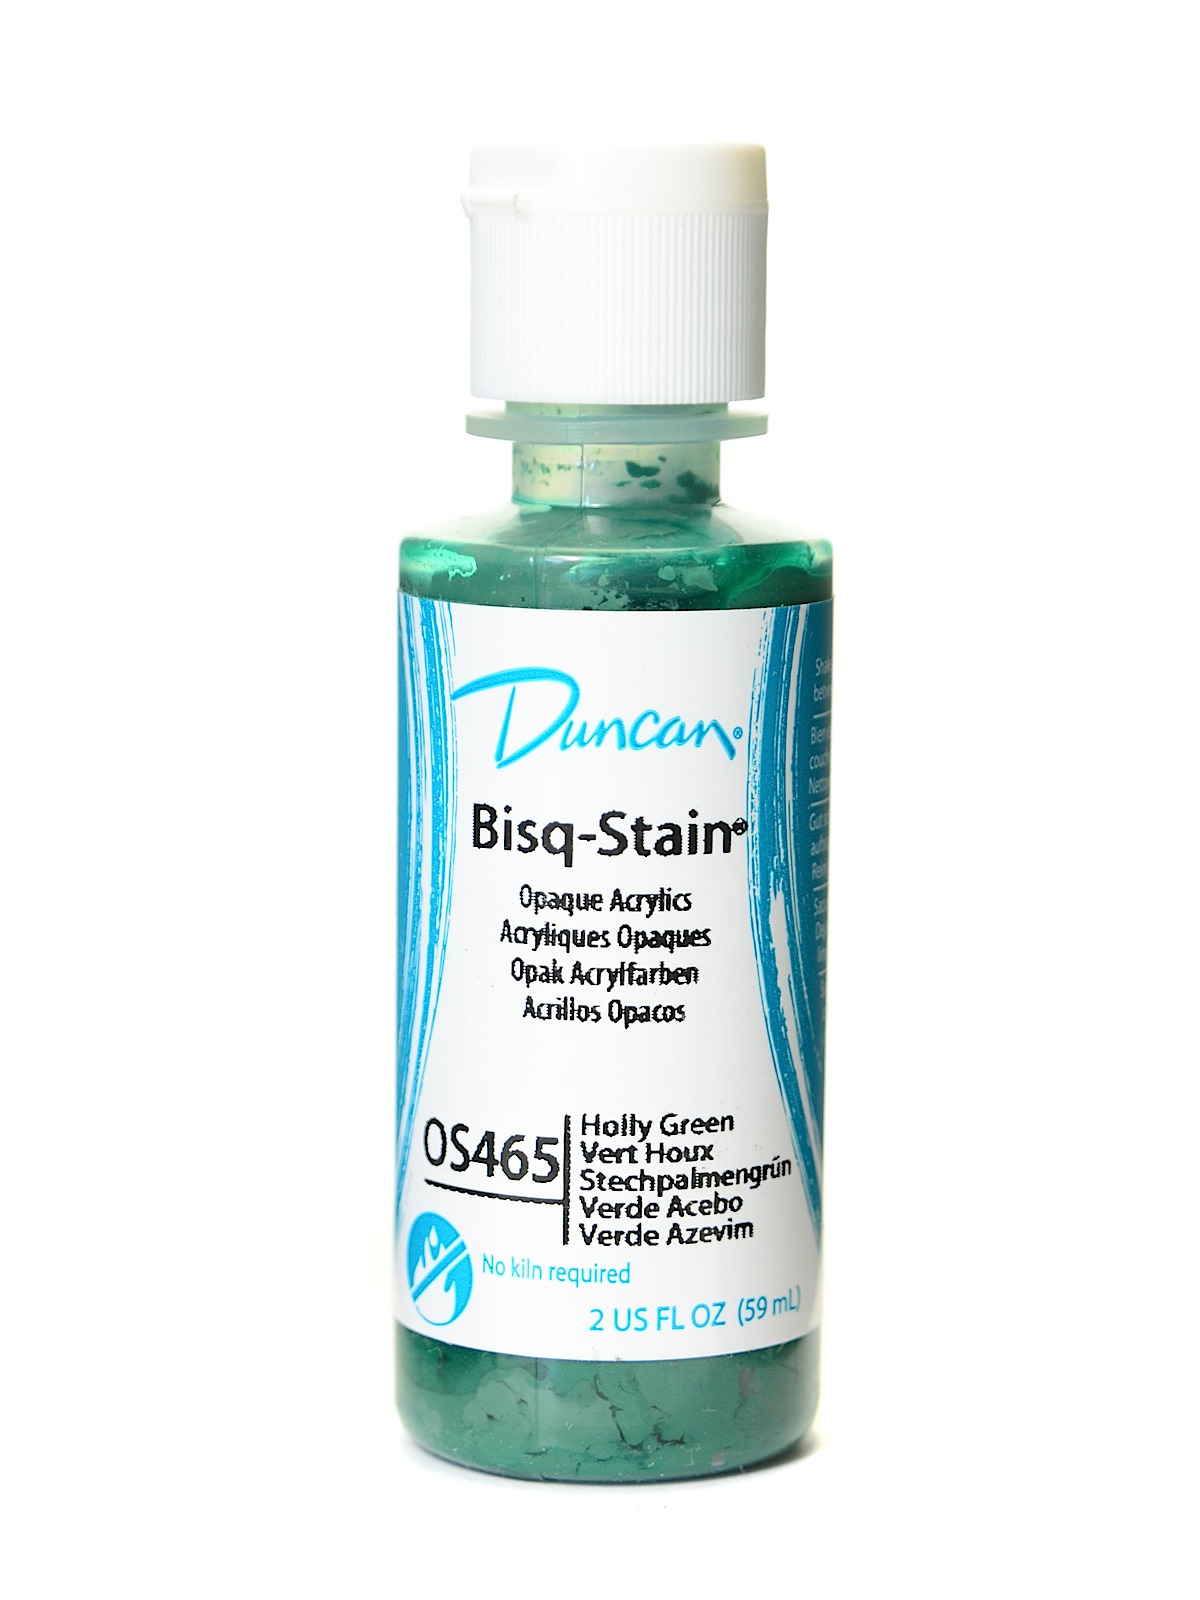 Bisq-stain Opaques Holly Green 2 Oz.